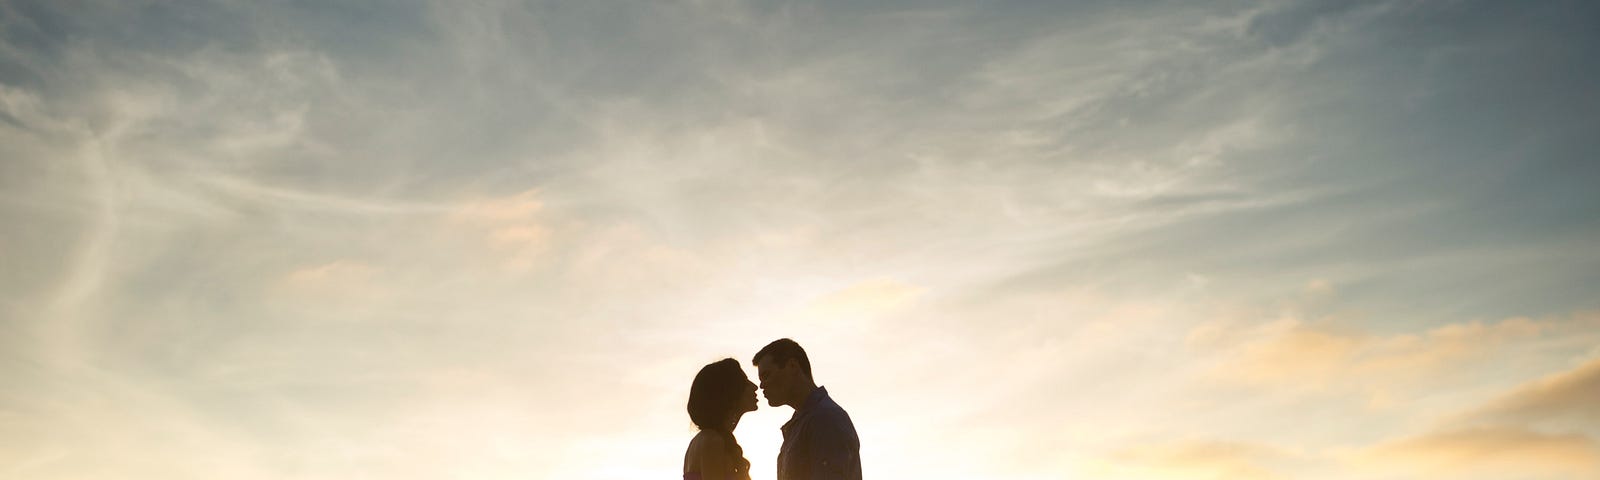 A couple overlooking the ocean at sunset, about to kiss.